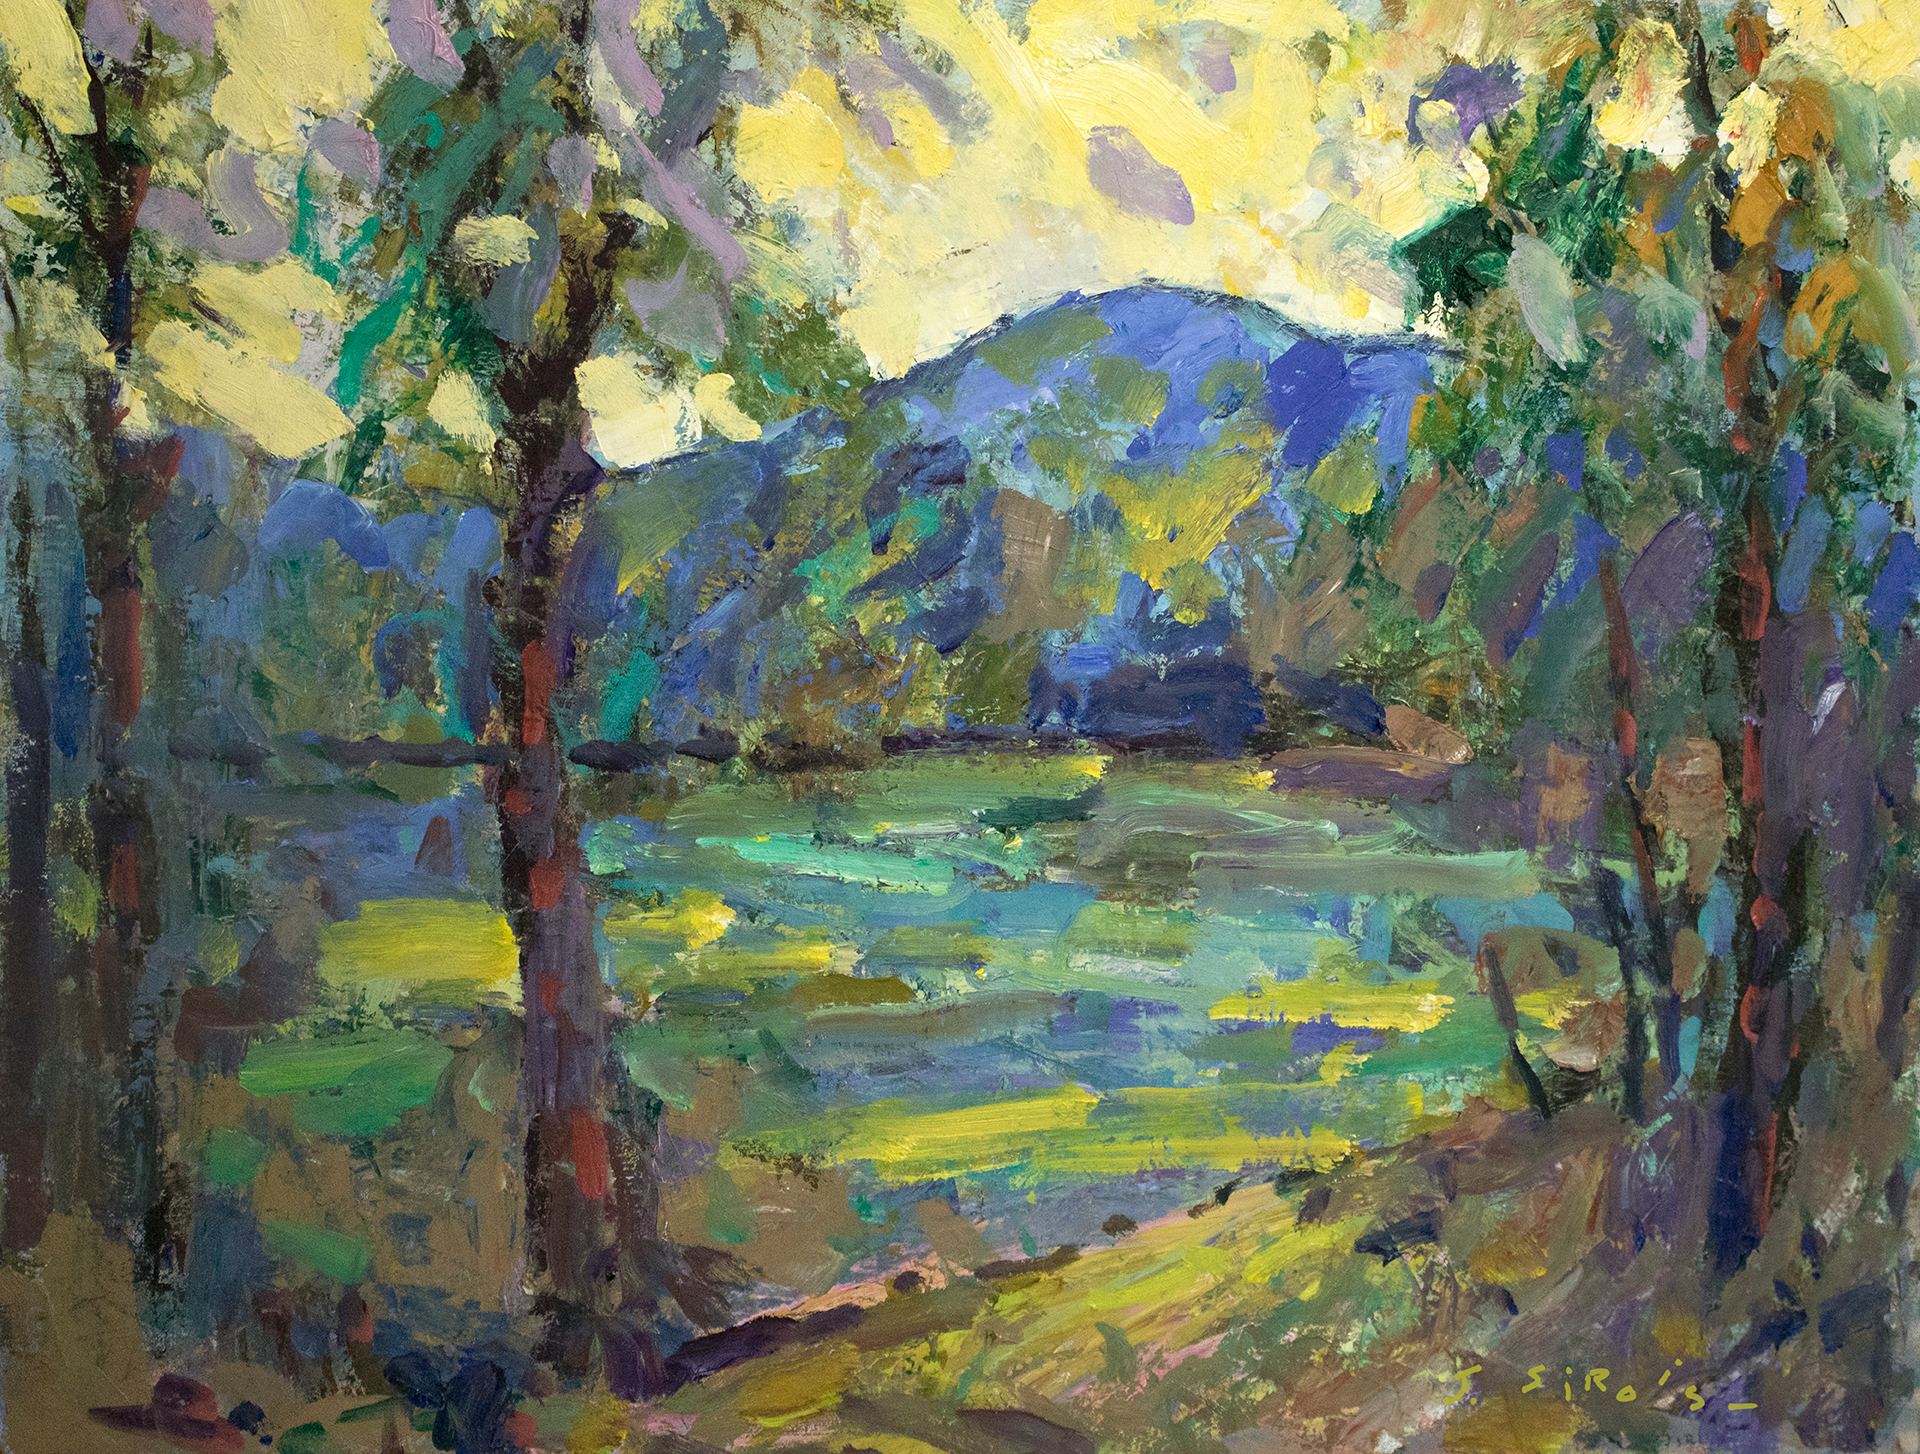  mg 1066 summer evening onthe lake 30x24 oil sm 72ppi f33myw